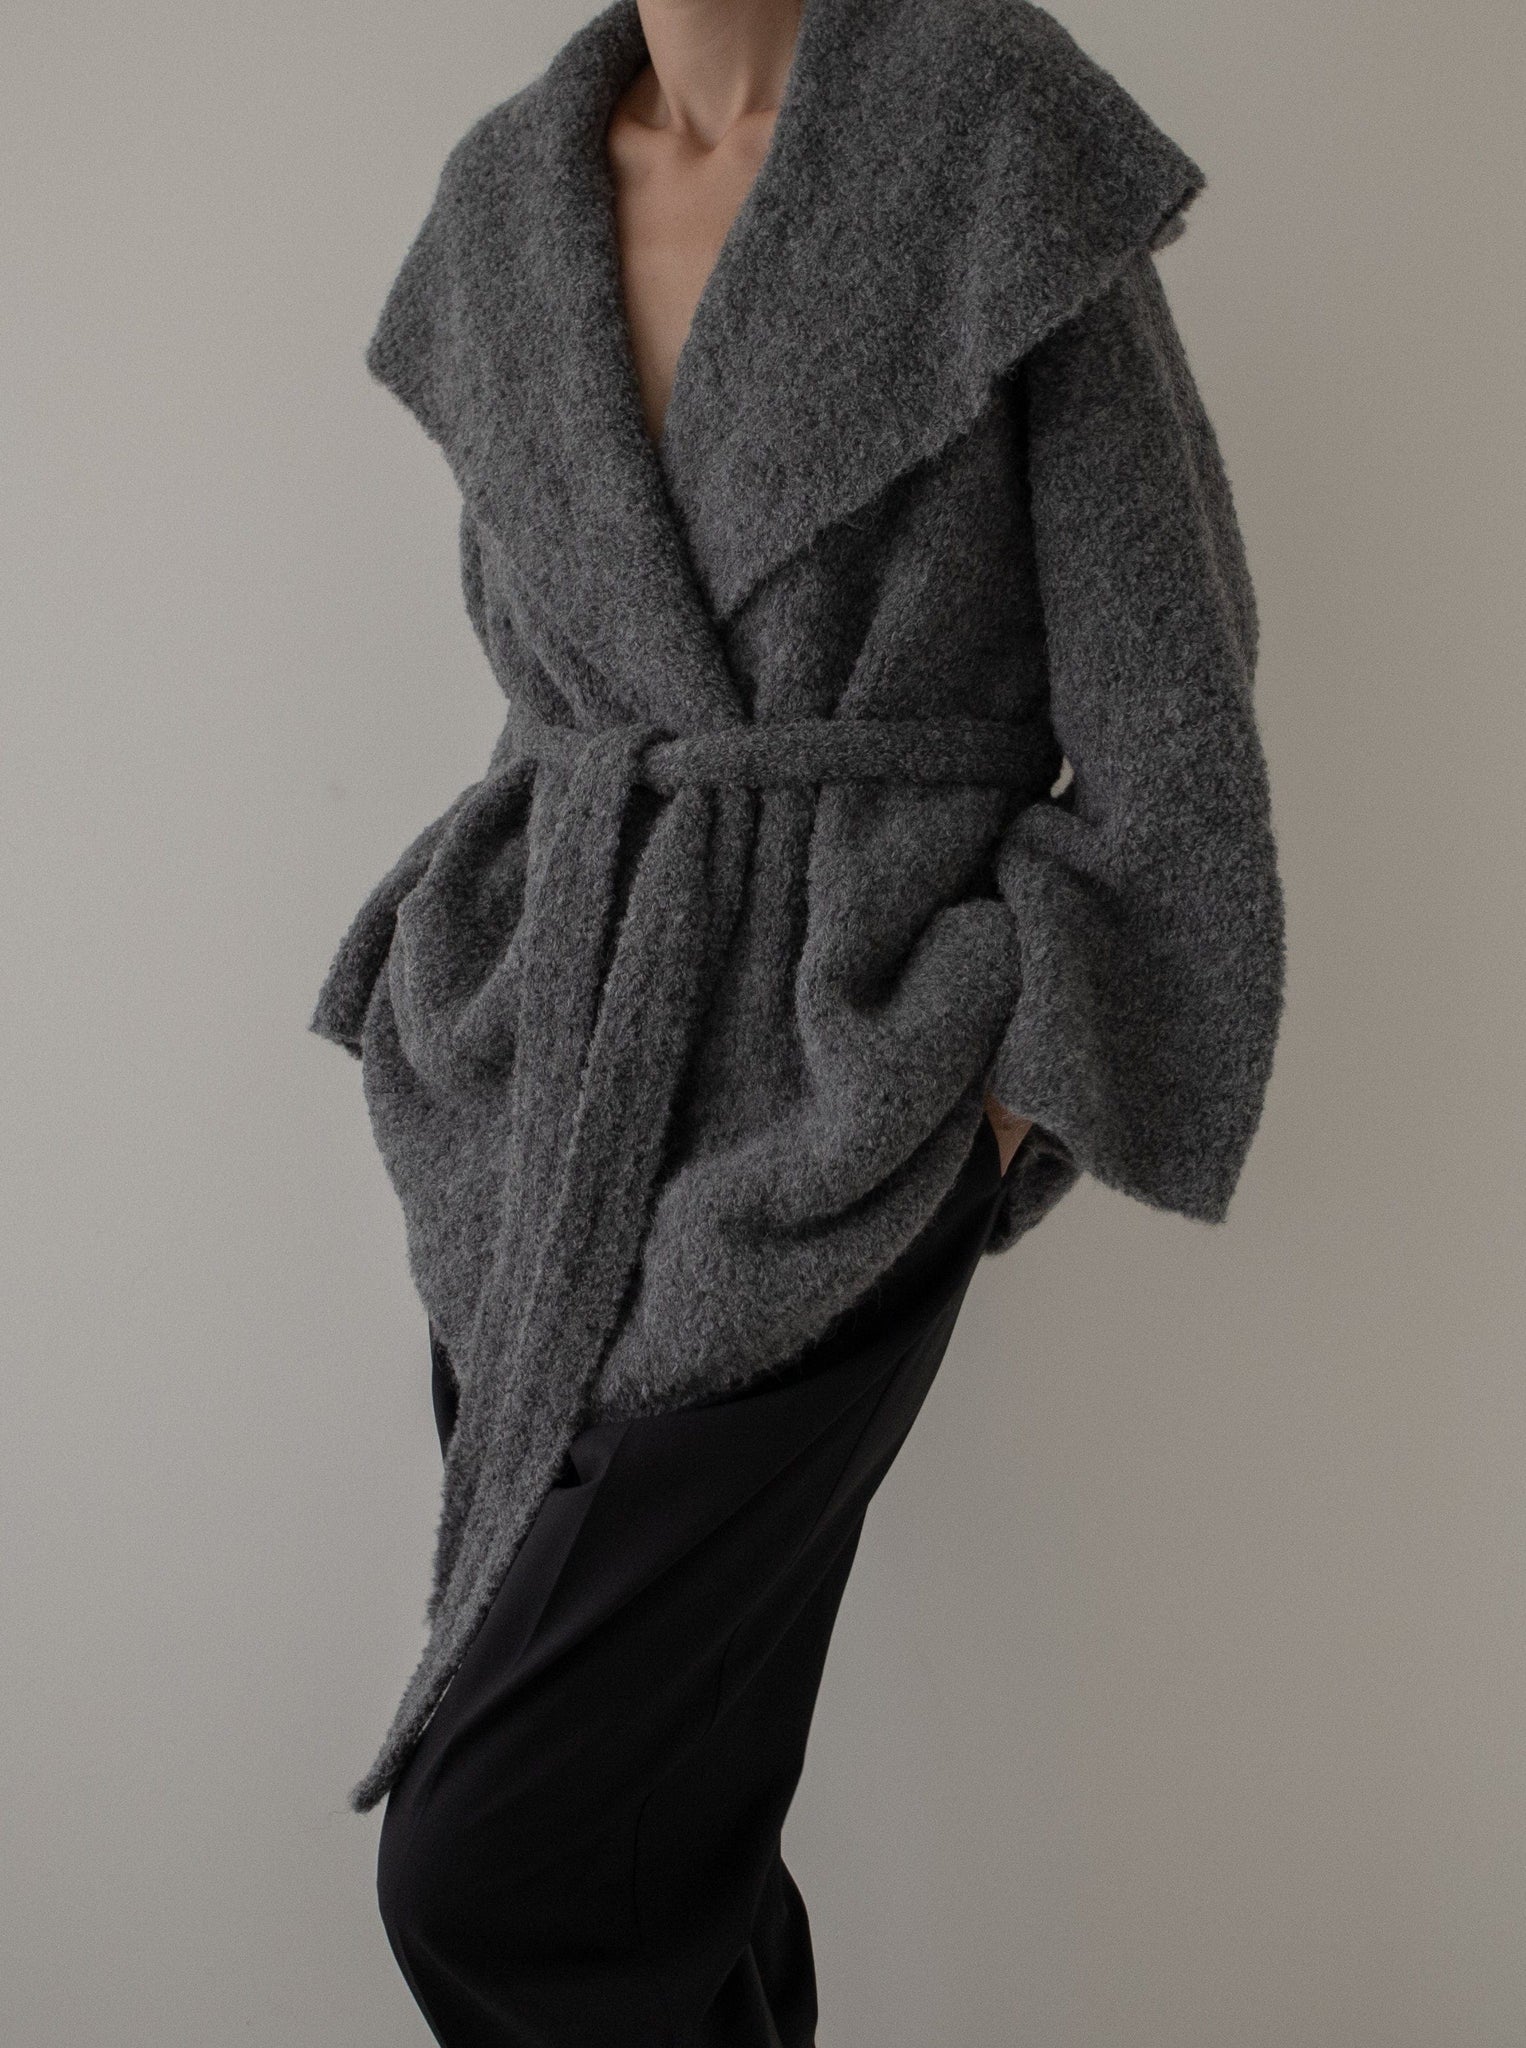 Canyon Wrap Sweater Coat - Charcoal Grey - pre-order